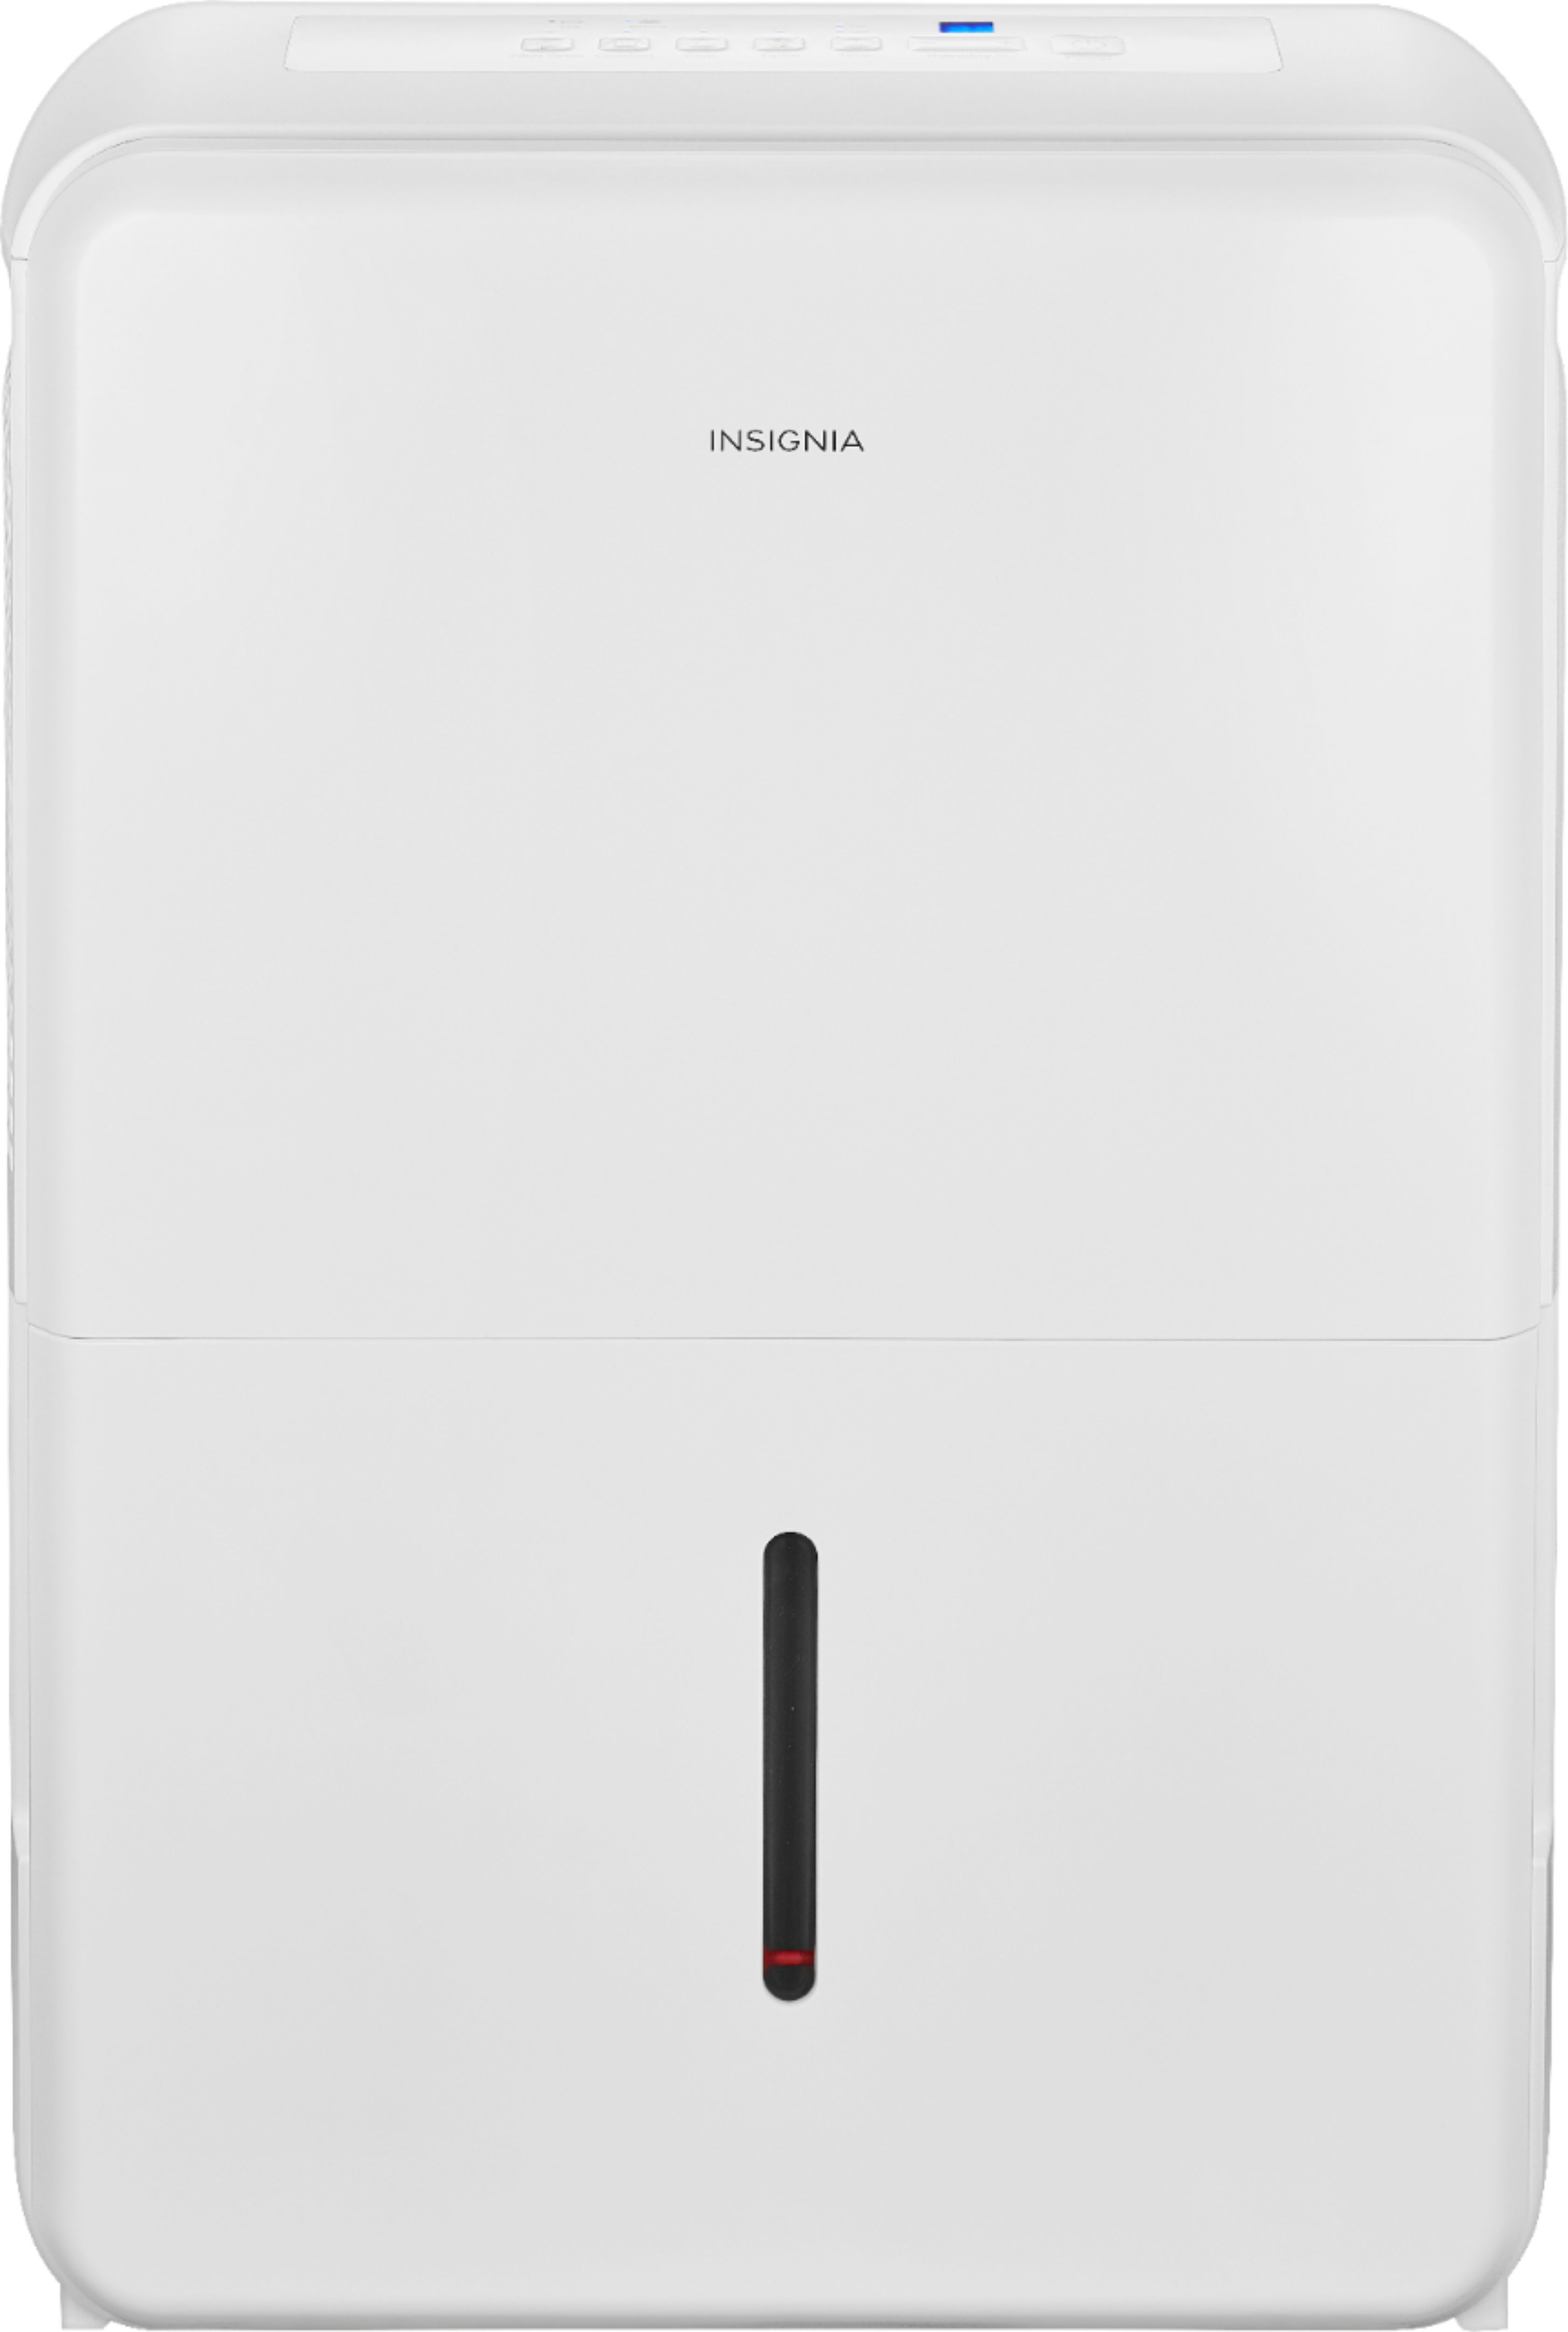 Insignia™ - 50-Pint Dehumidifier - White, Energy Star Certified, $149.99, free shipping, Best Buy